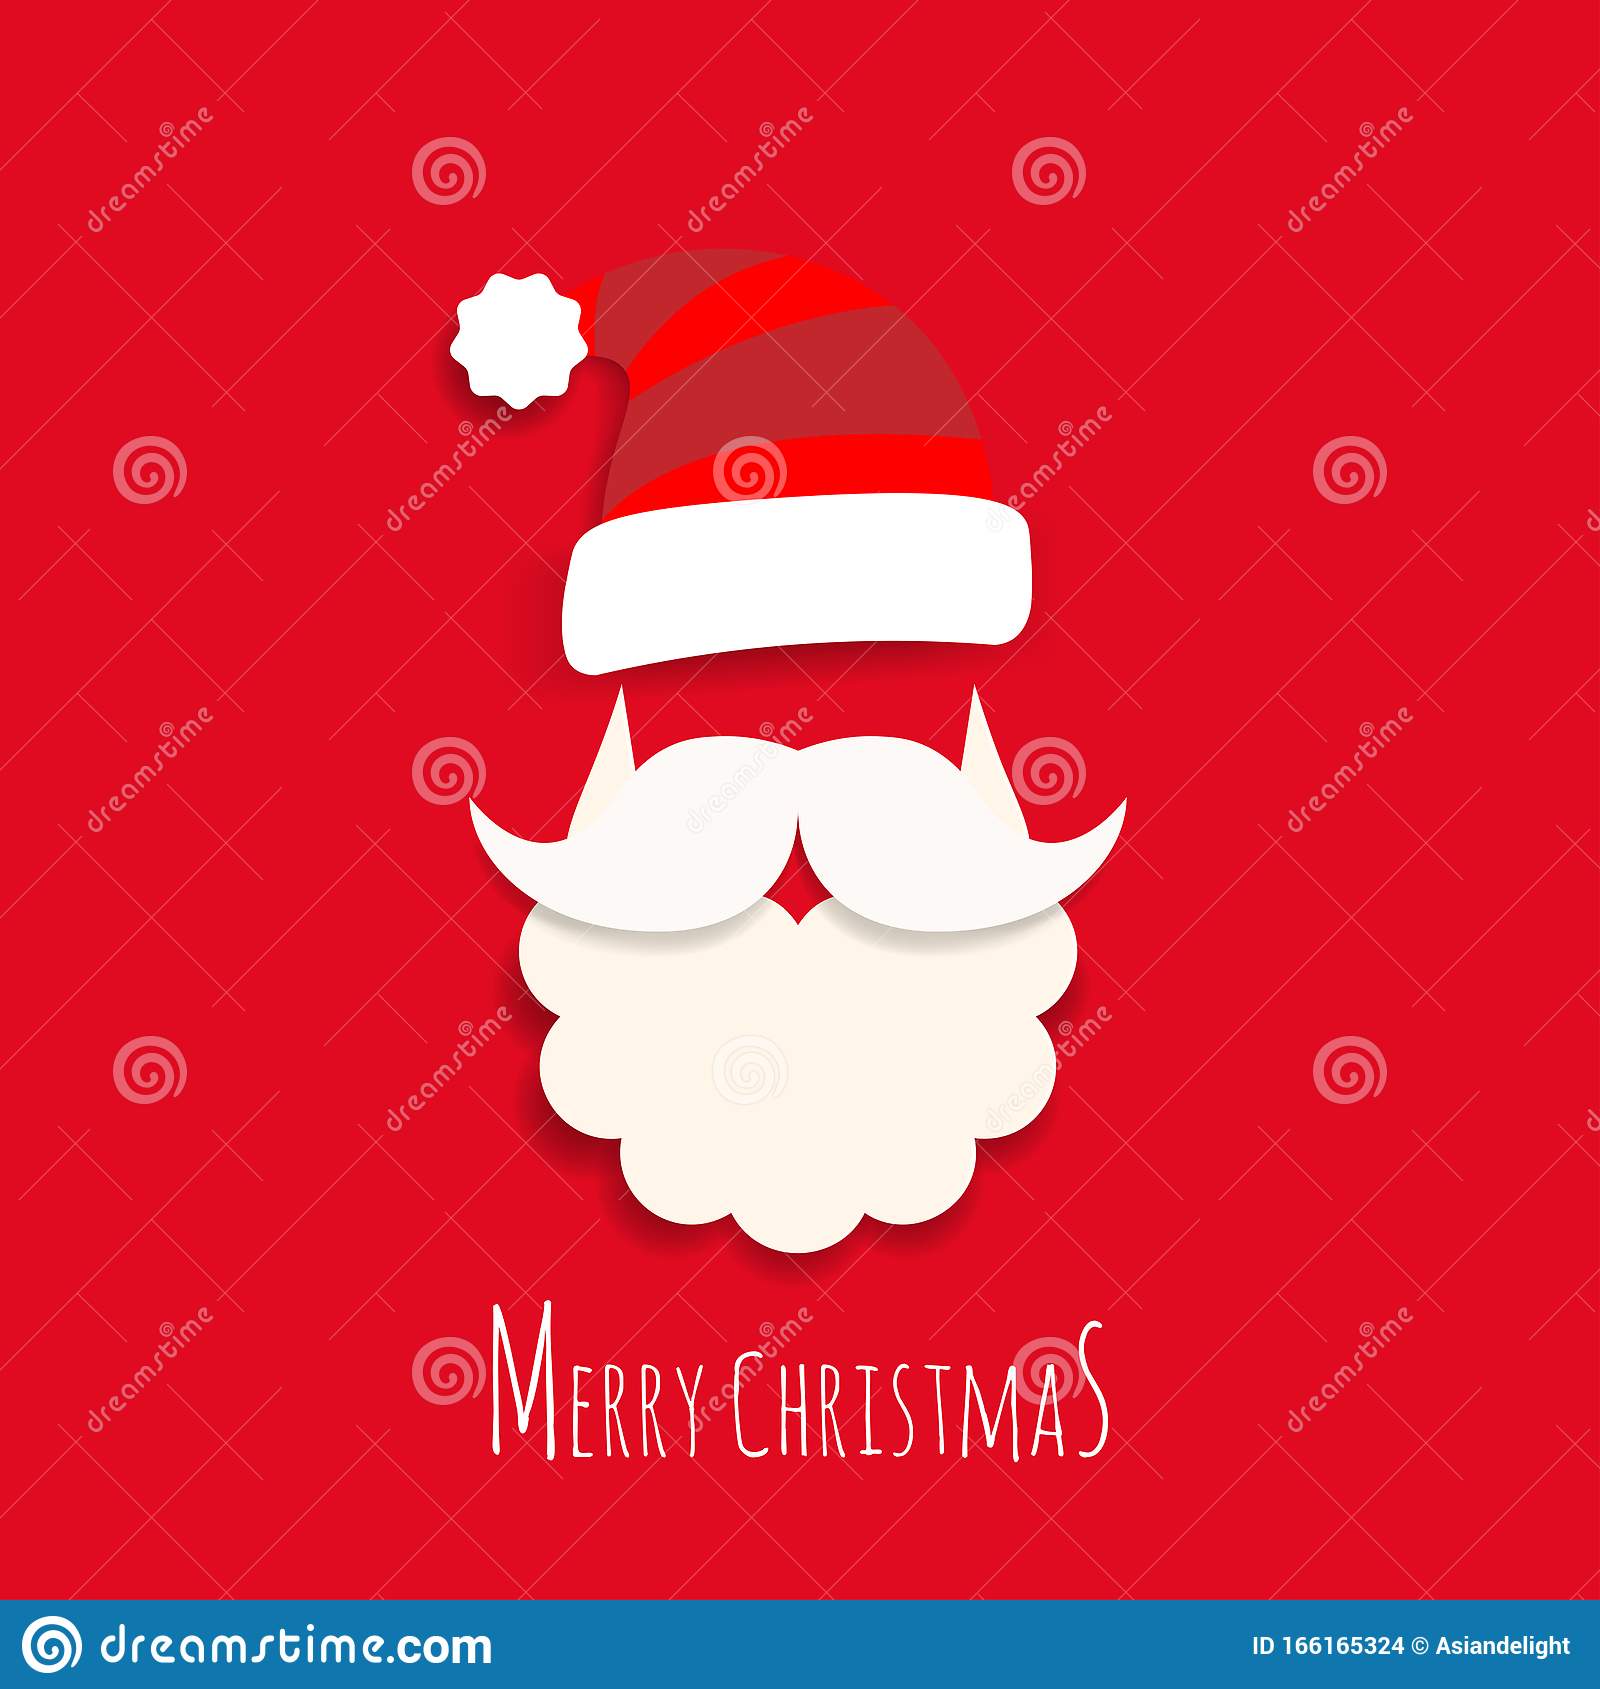 Vector cute santa claus cartoon with text merry christmas on red background for christmas wallpaper background stock vector